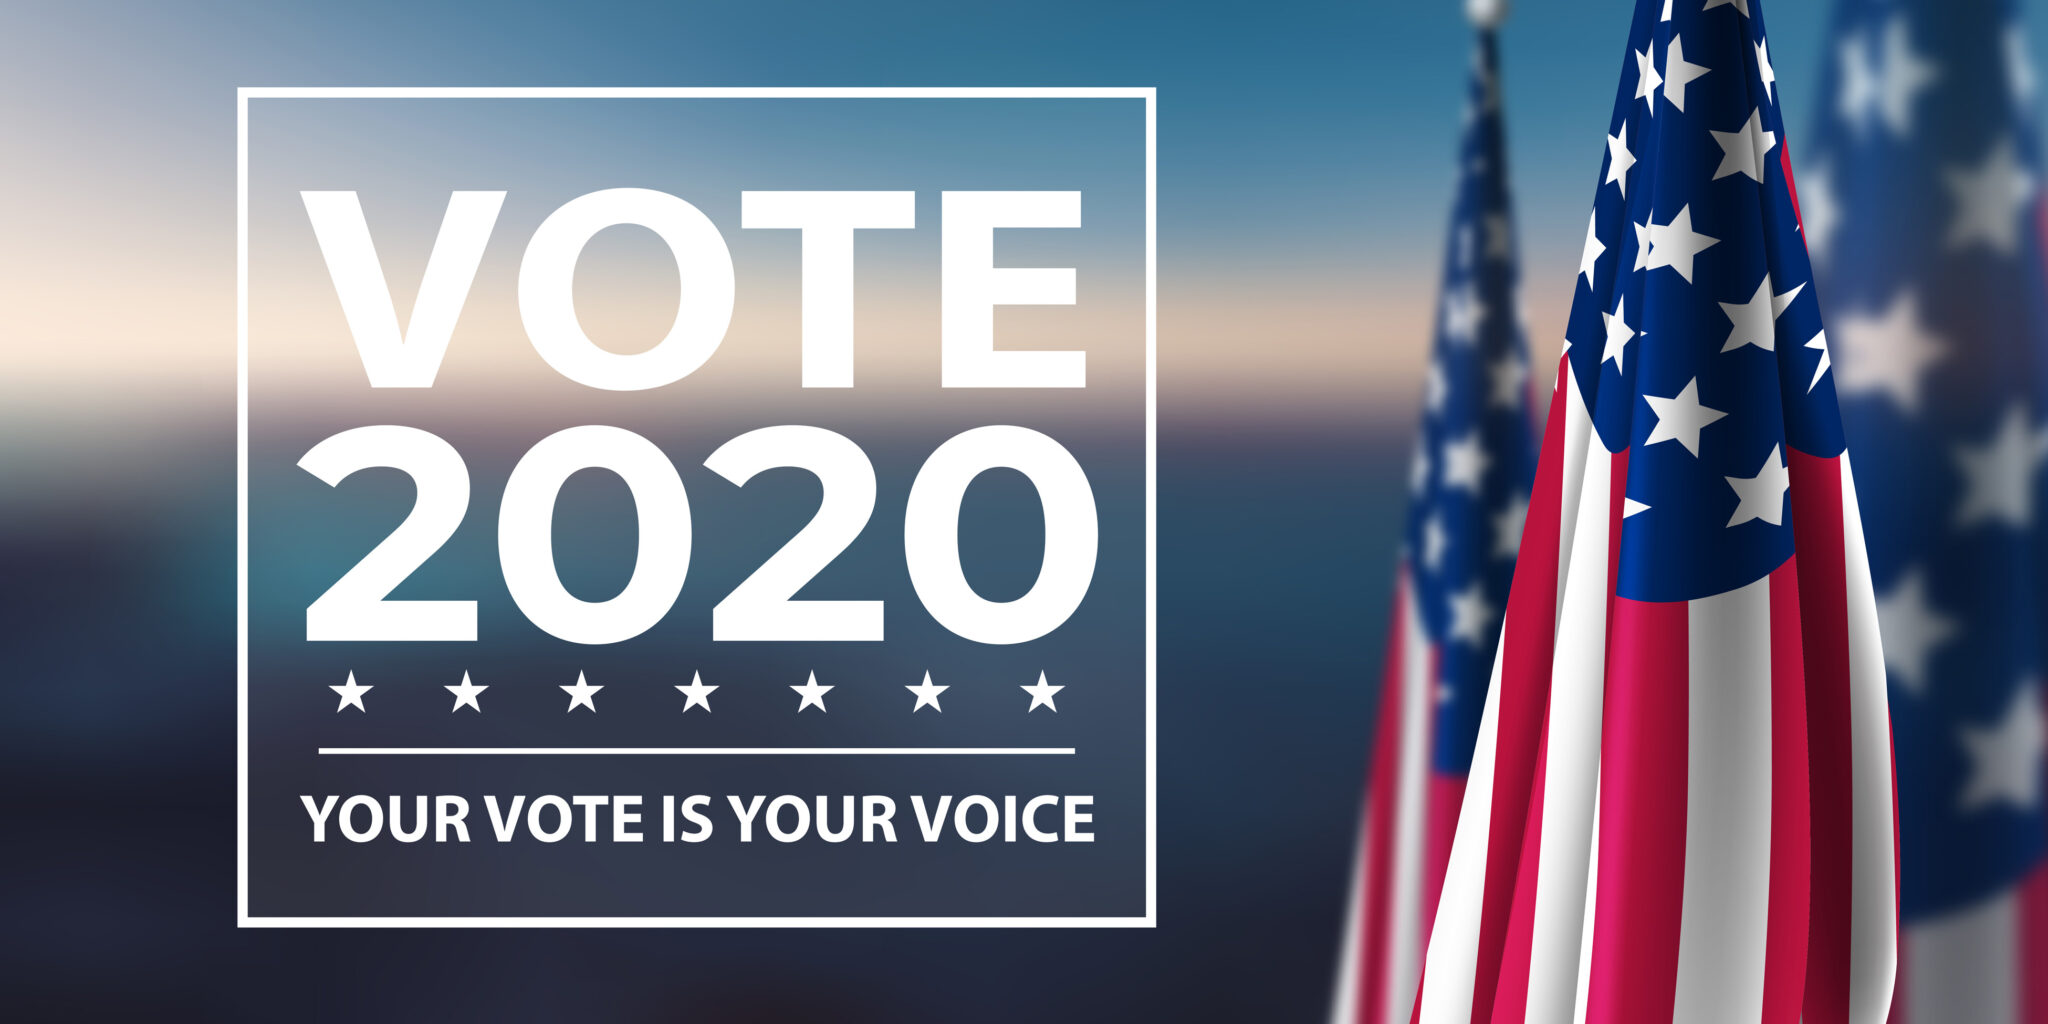 Graphic of the American flag behind text that says "Vote 2020, your vote is your voice"